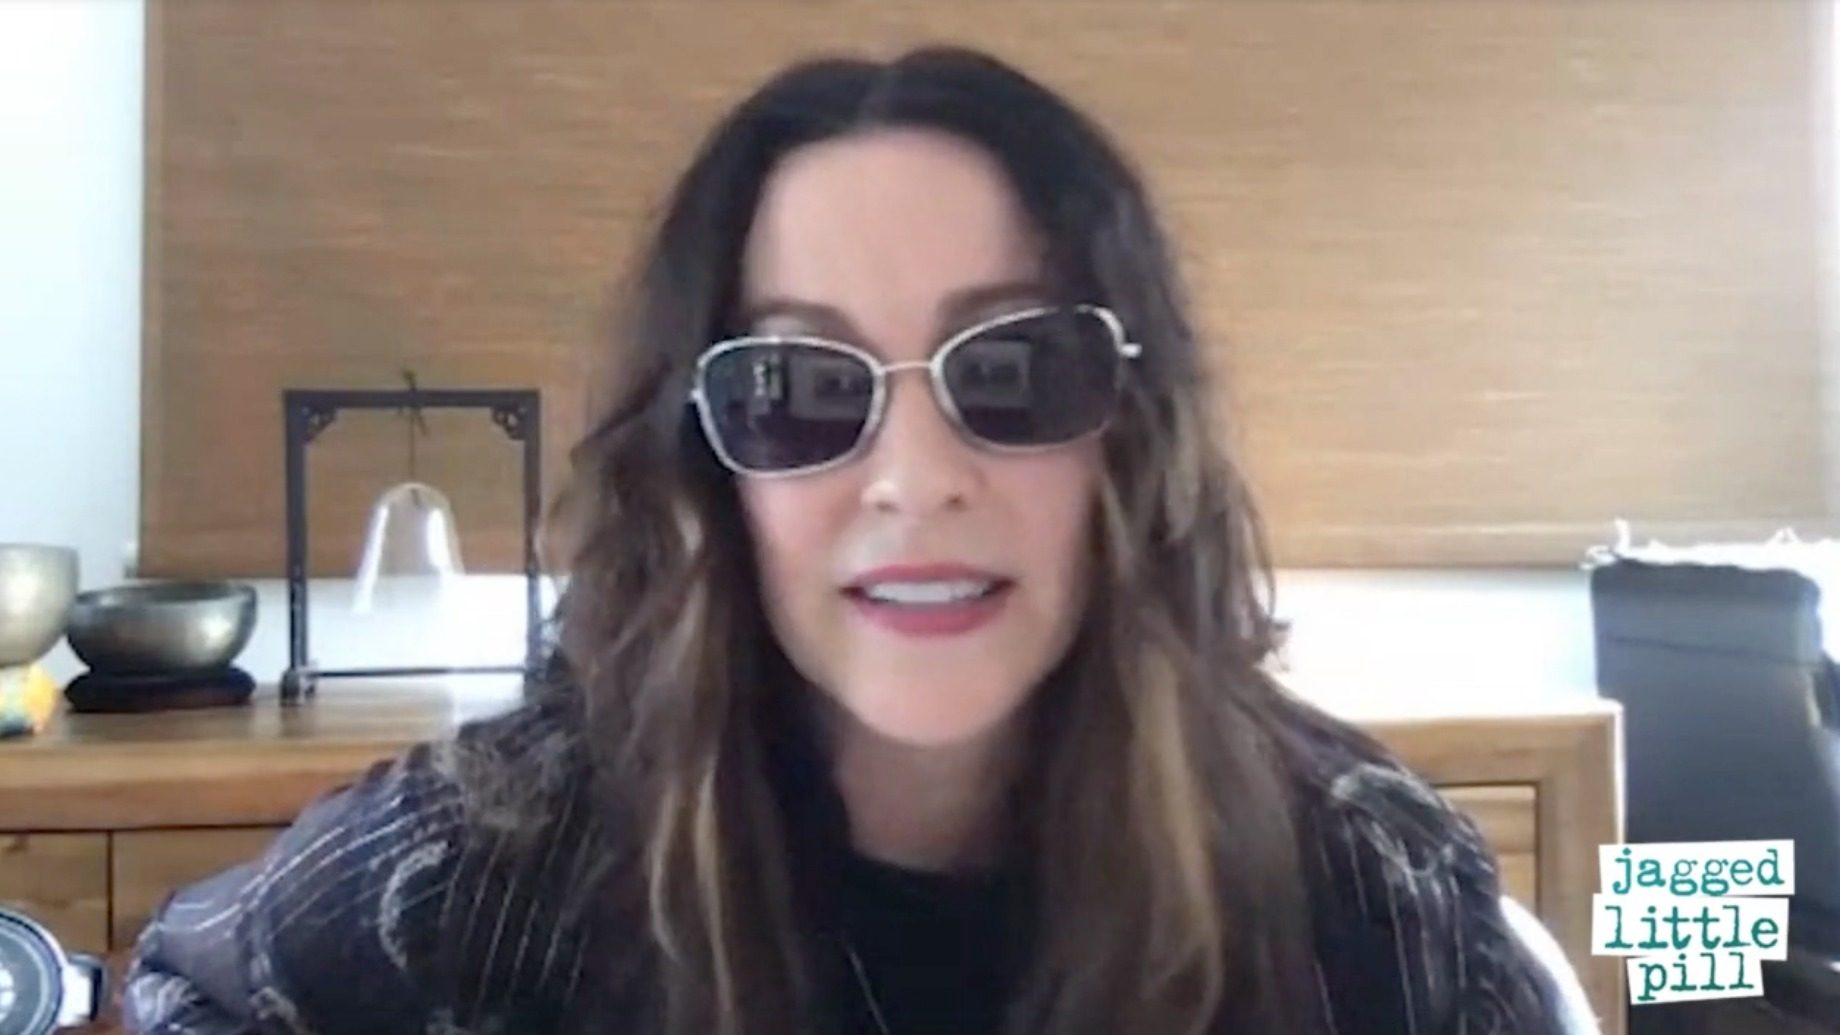 Alanis Morissette and the ‘Jagged Little Pill’ cast come together for online event